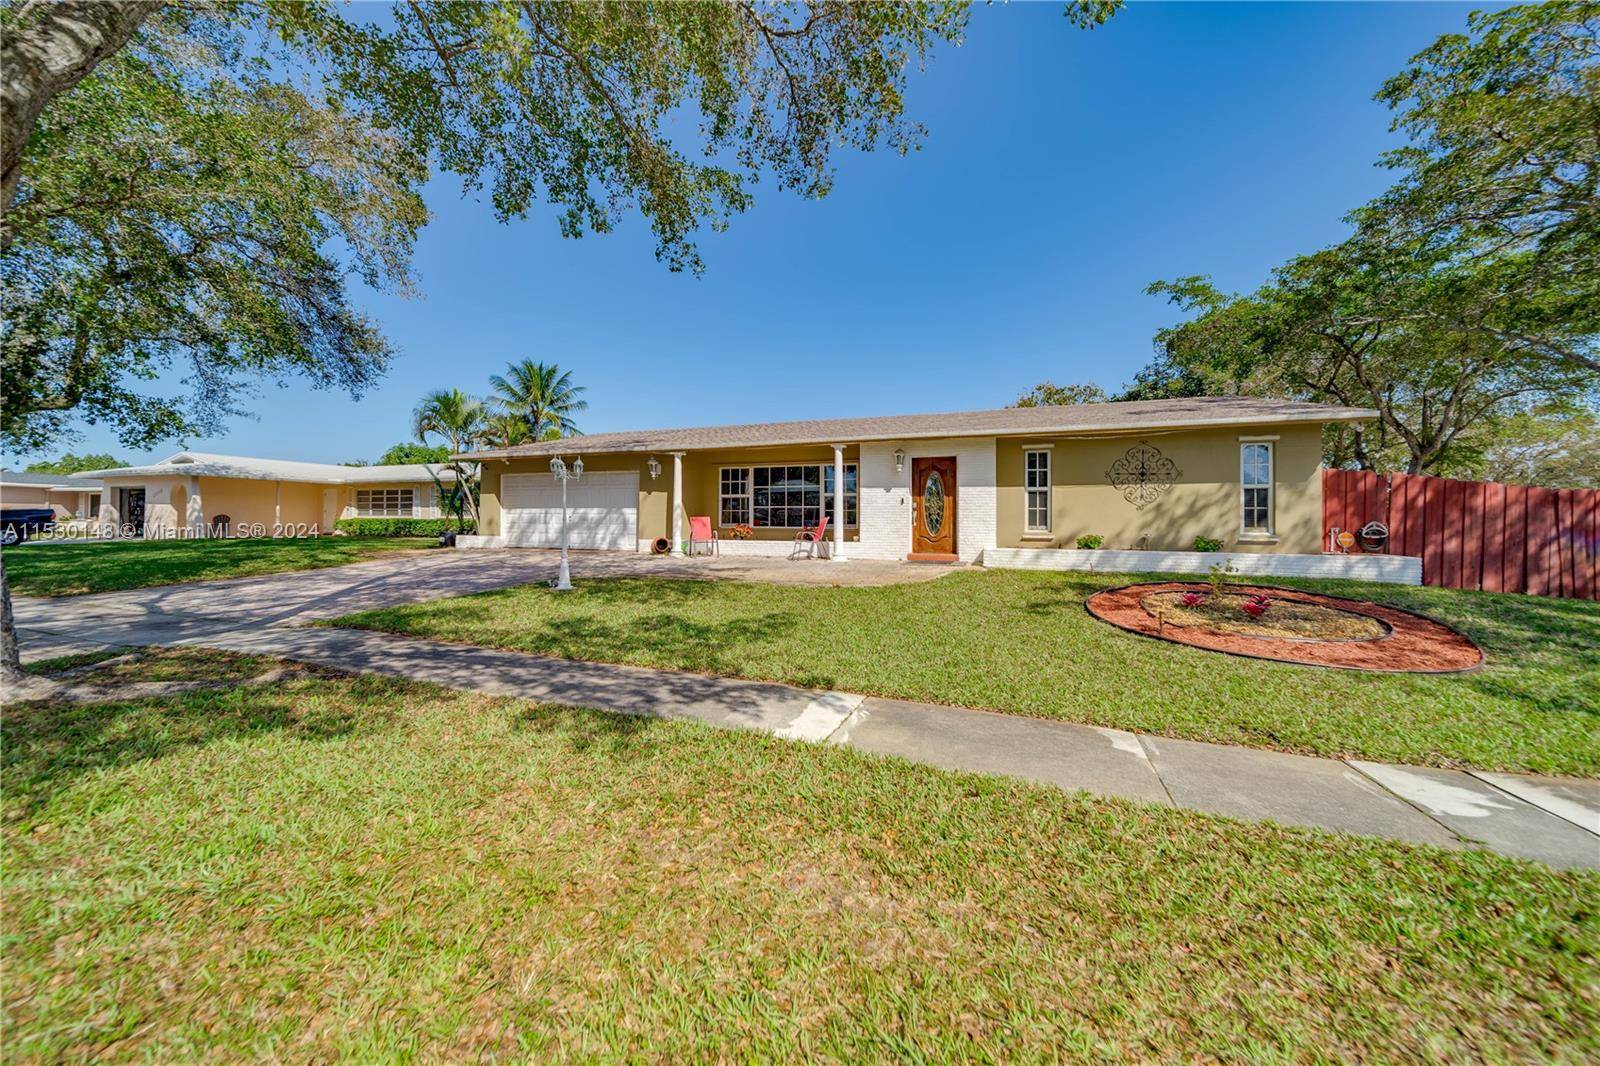 Beautiful and bright 5 bedroom, 3 bath home in the heart of Pembroke Pines with a pool !